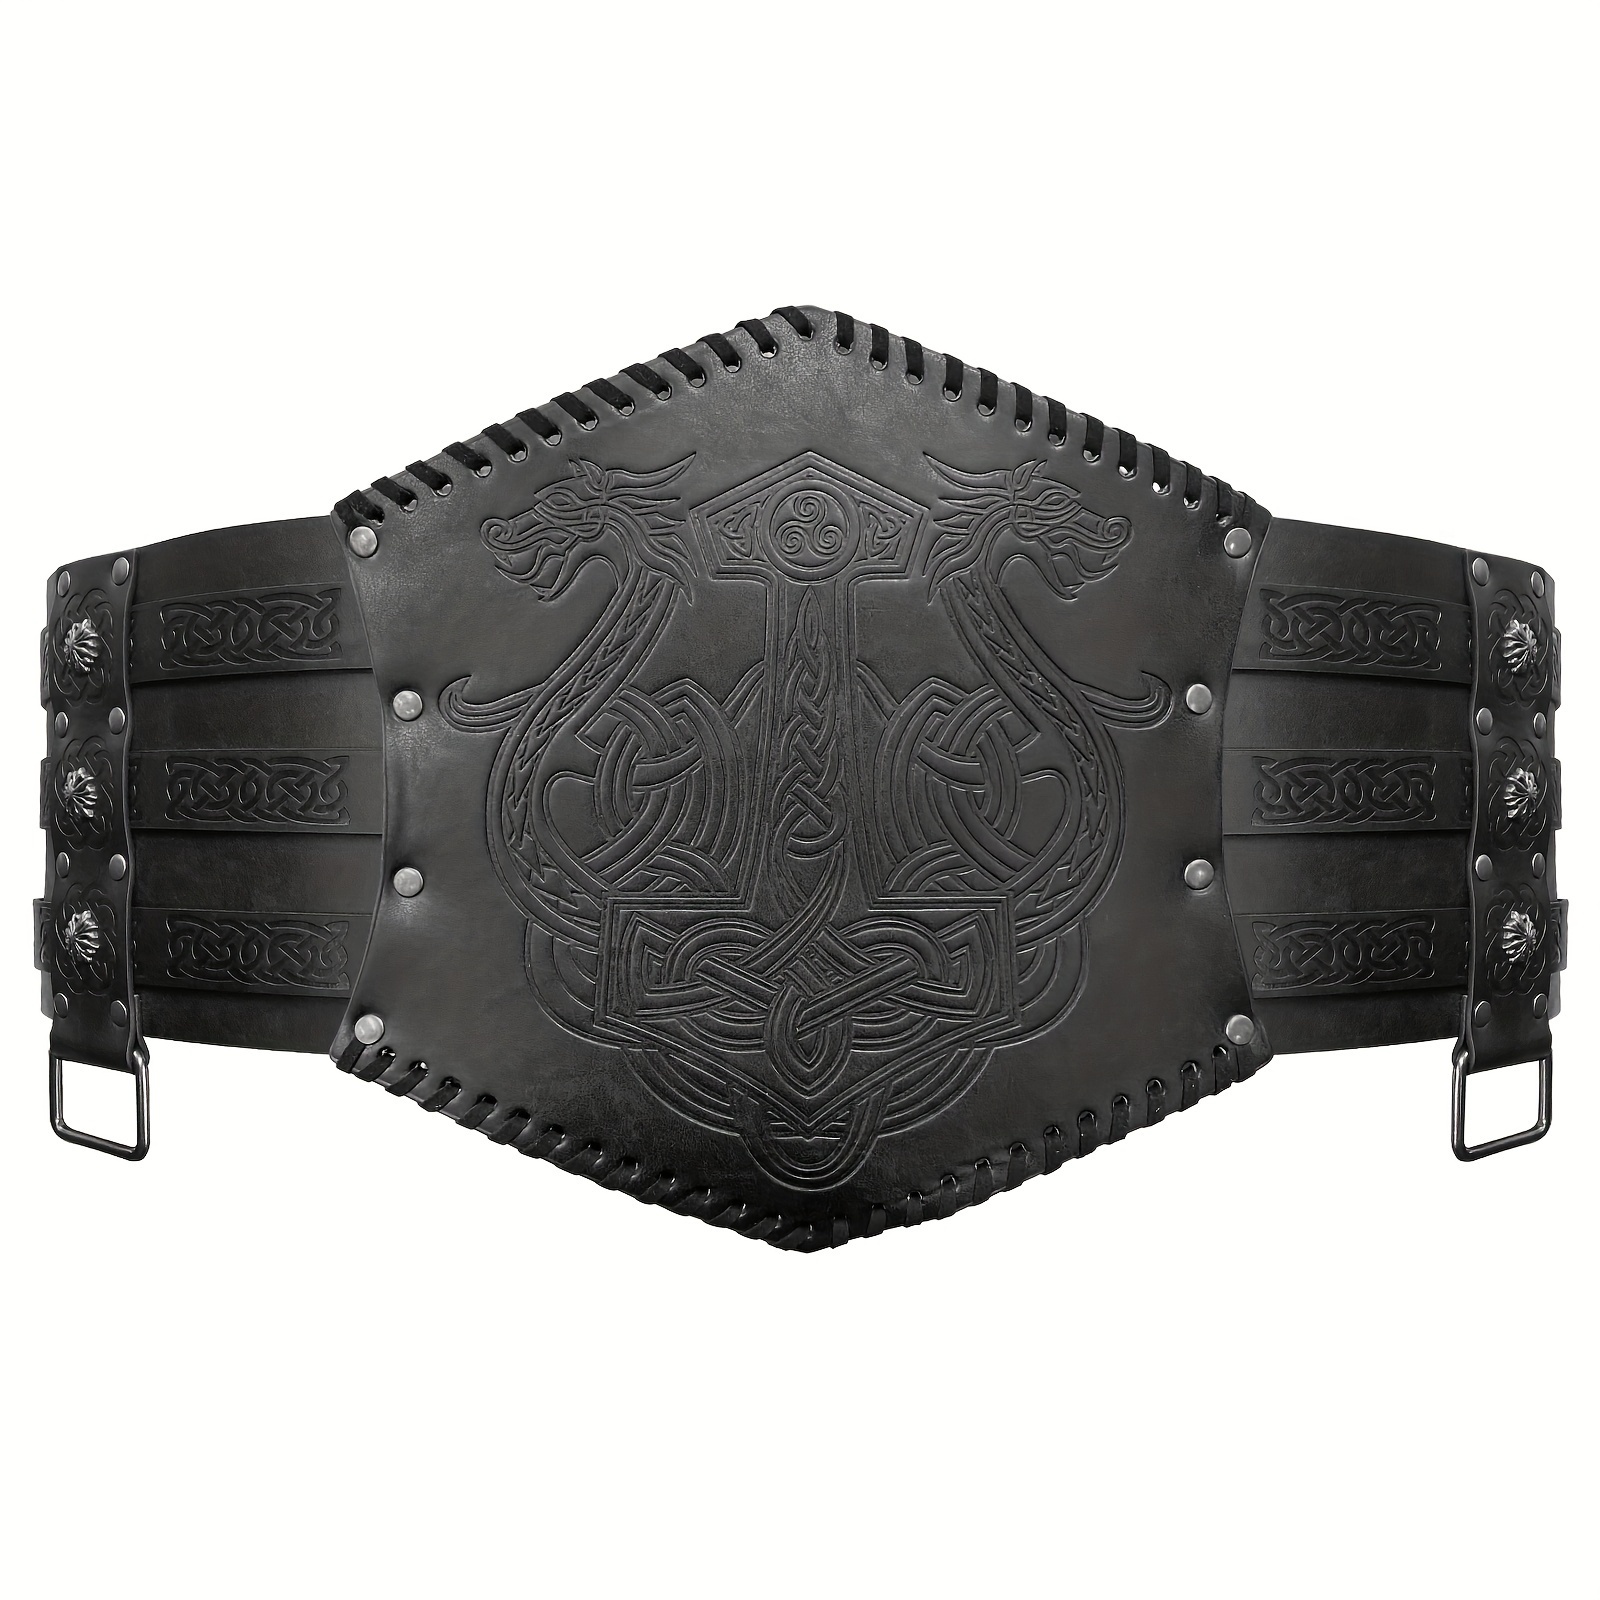 Medieval Belt for Men Embossed Costume Knight Corset Belt Cosplay PU Leather